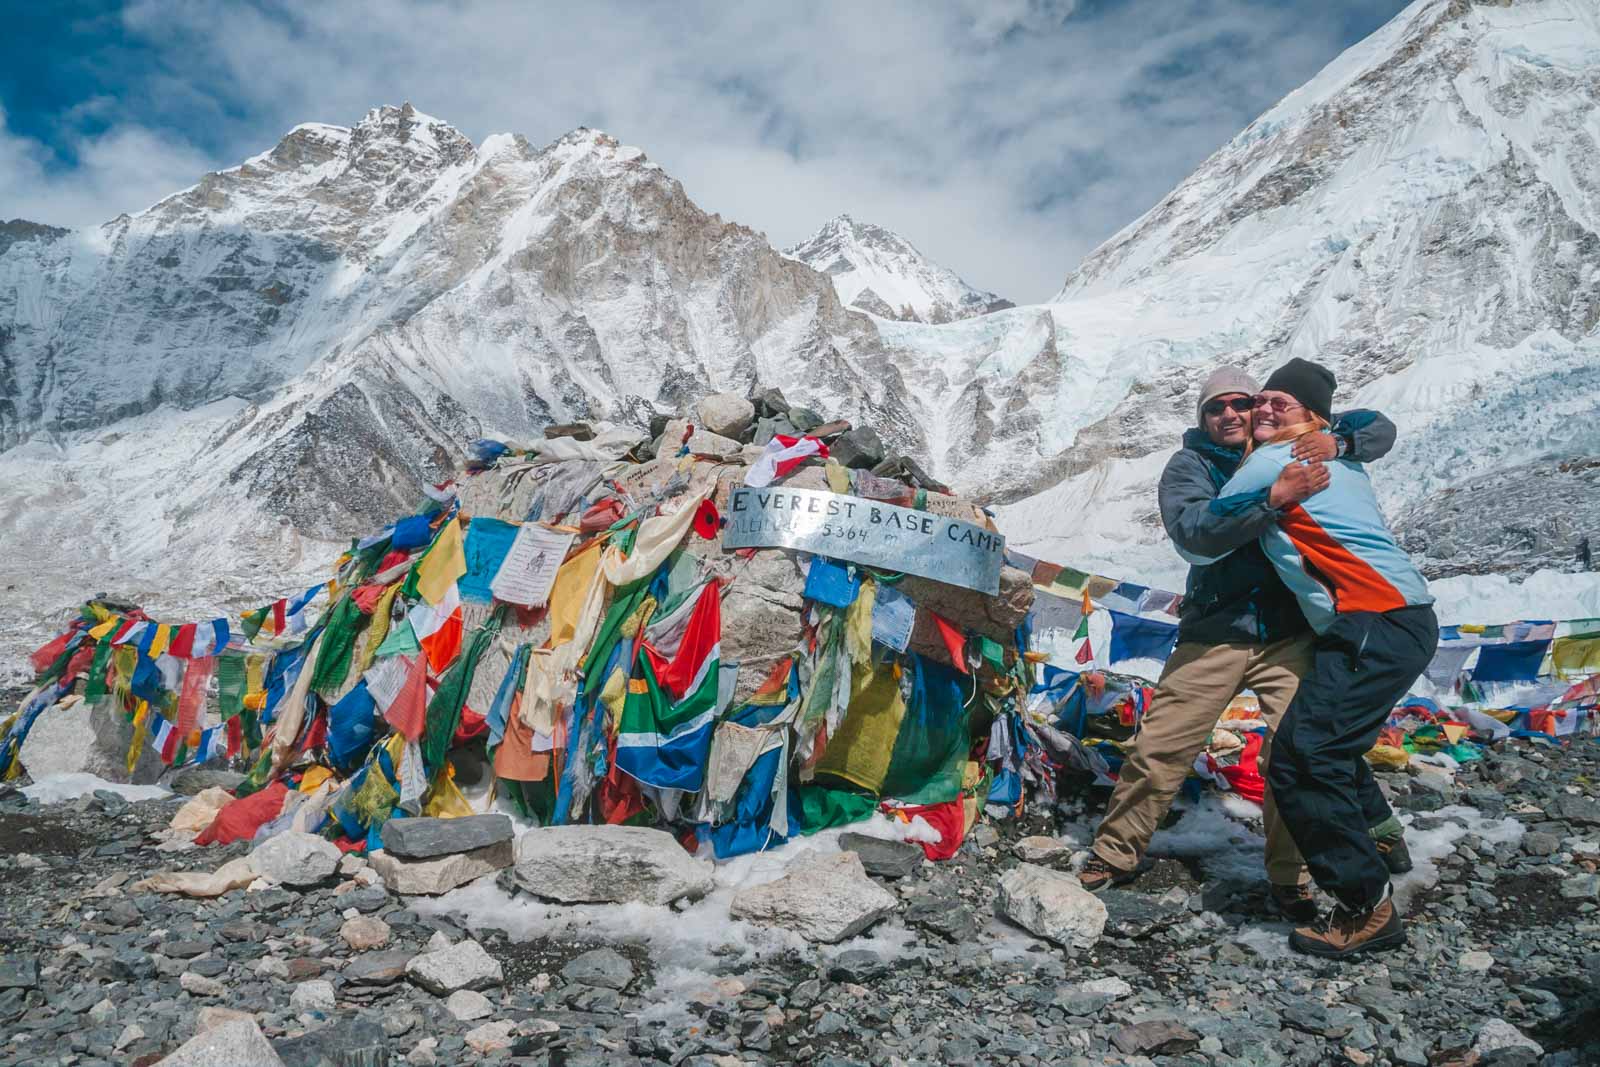 Where to book your Everest Base Camp Trek